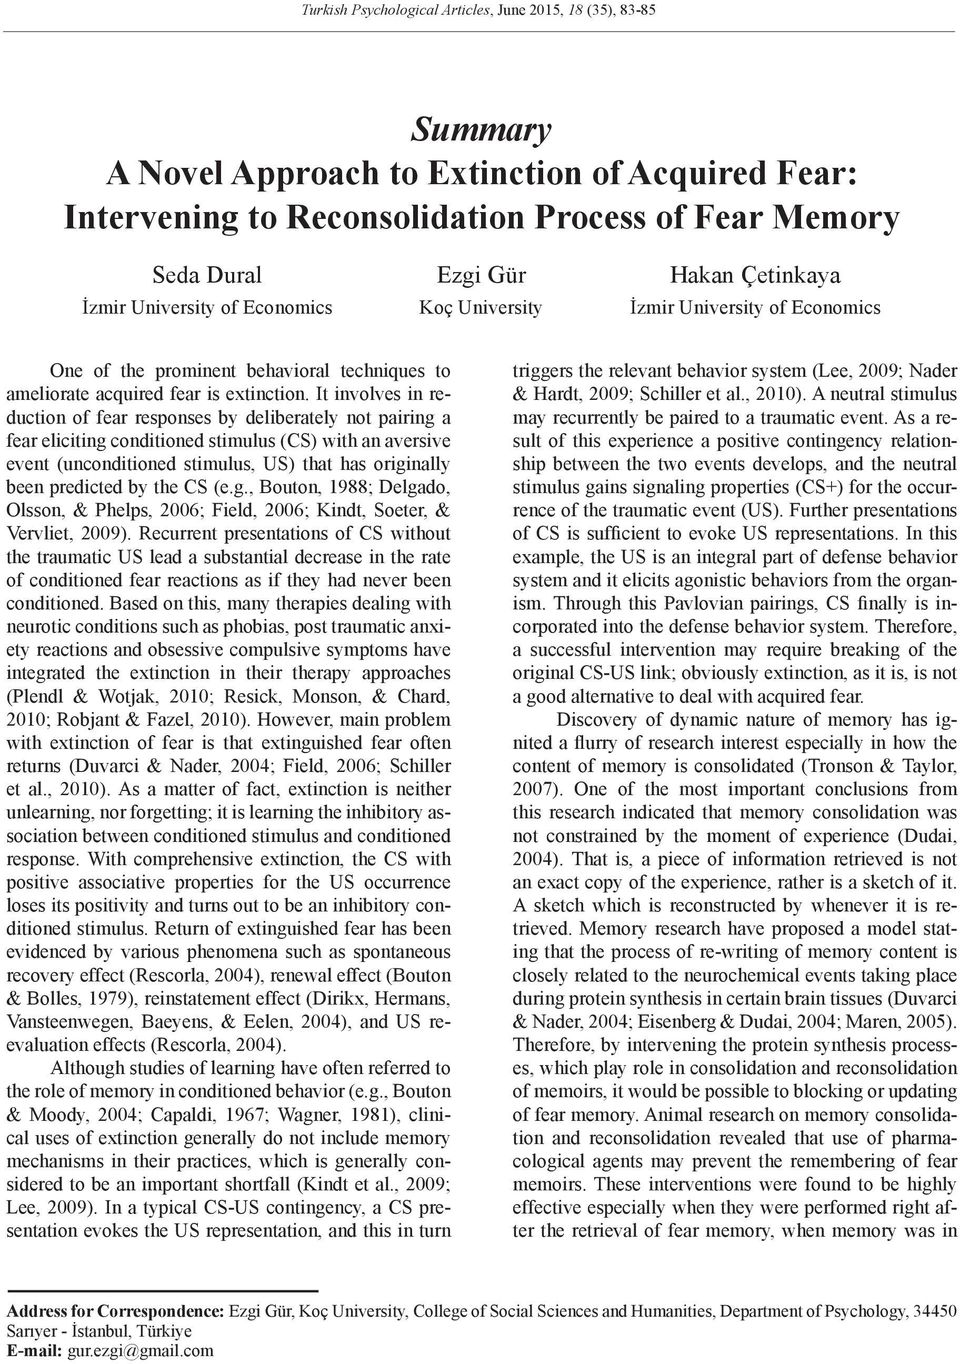 It involves in reduction of fear responses by deliberately not pairing a fear eliciting conditioned stimulus (CS) with an aversive event (unconditioned stimulus, US) that has originally been